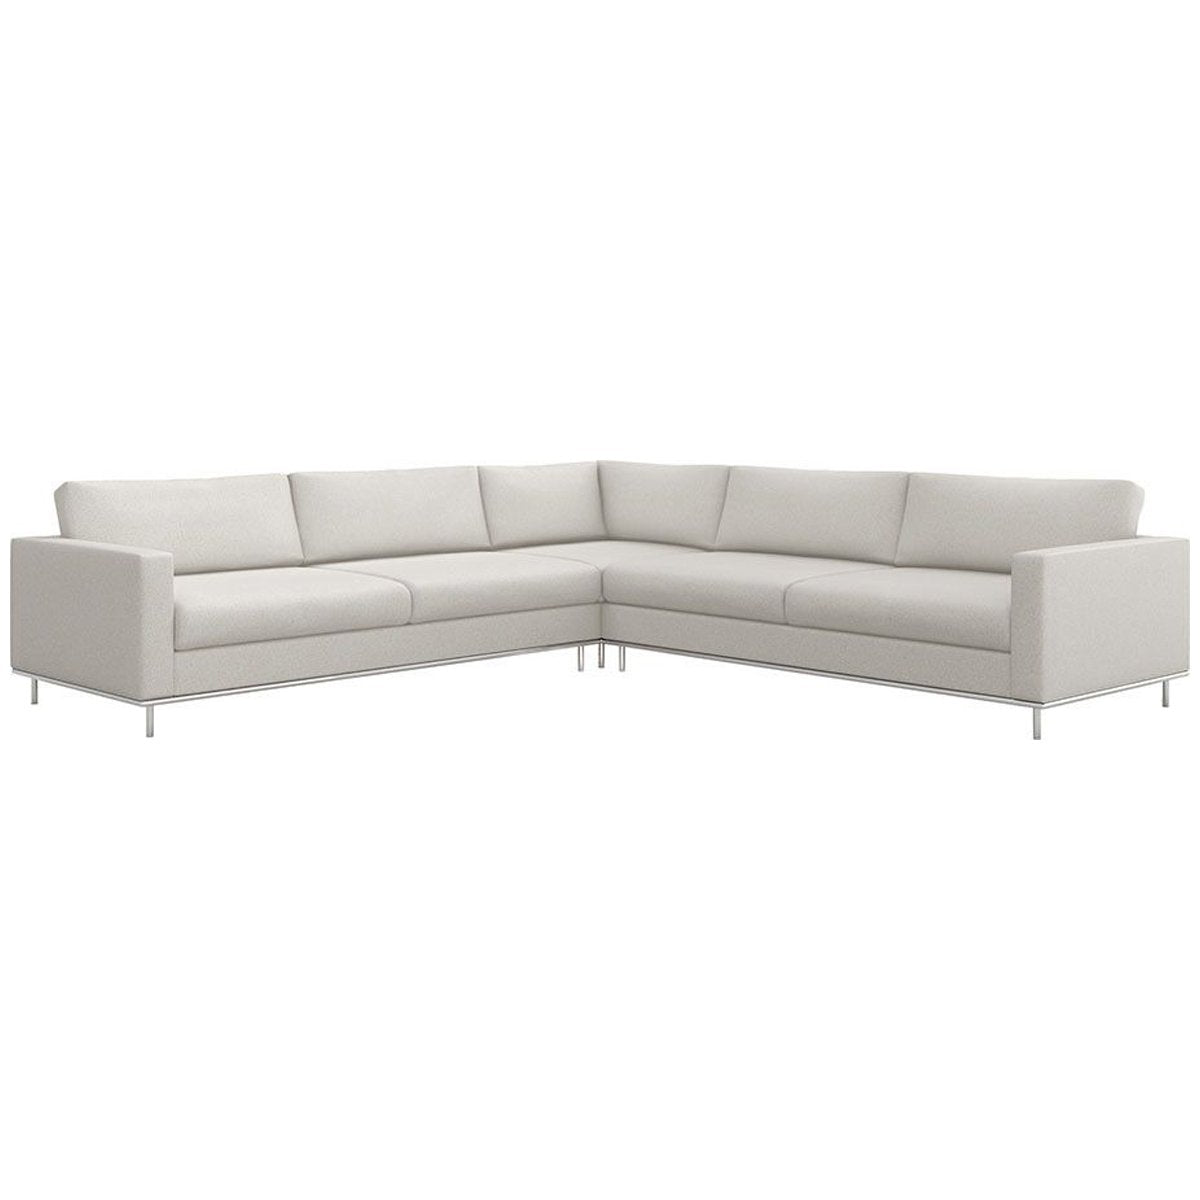 Interlude Home Valencia Sectional - Shearling